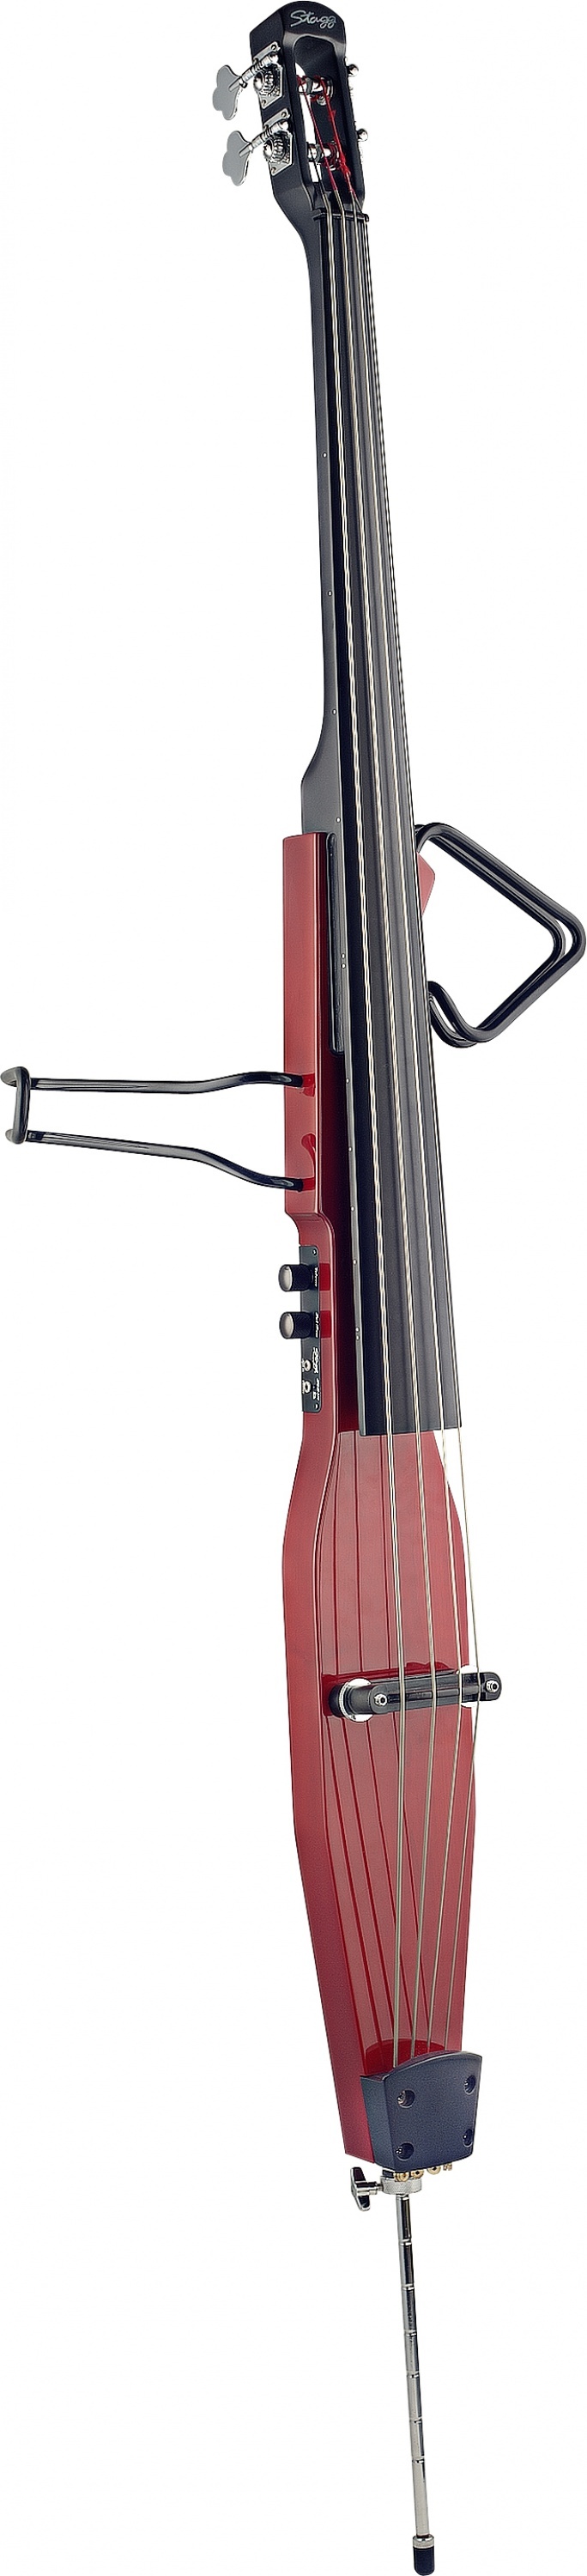 Stagg Edb-3/4 Tr - Electric double bass - Main picture